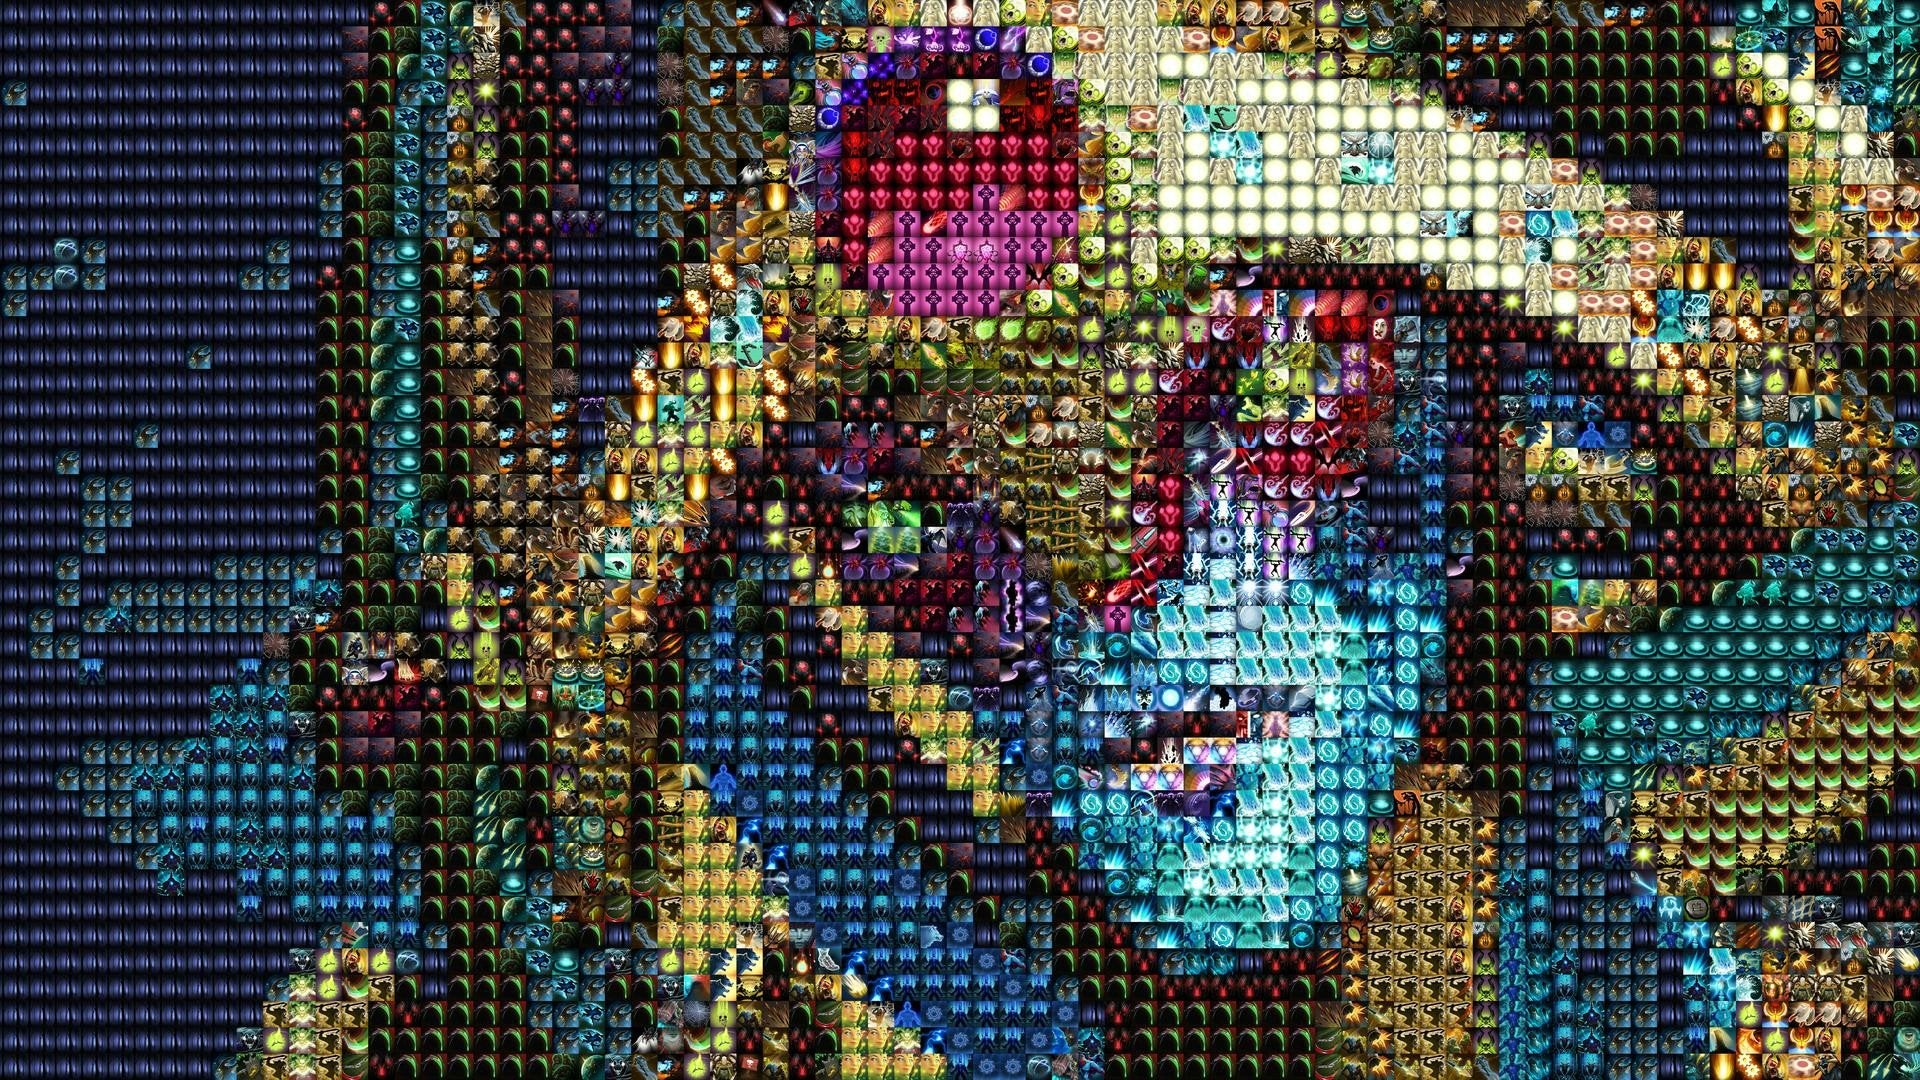 oracle wallpaper,mosaic,art,cross stitch,psychedelic art,embroidery